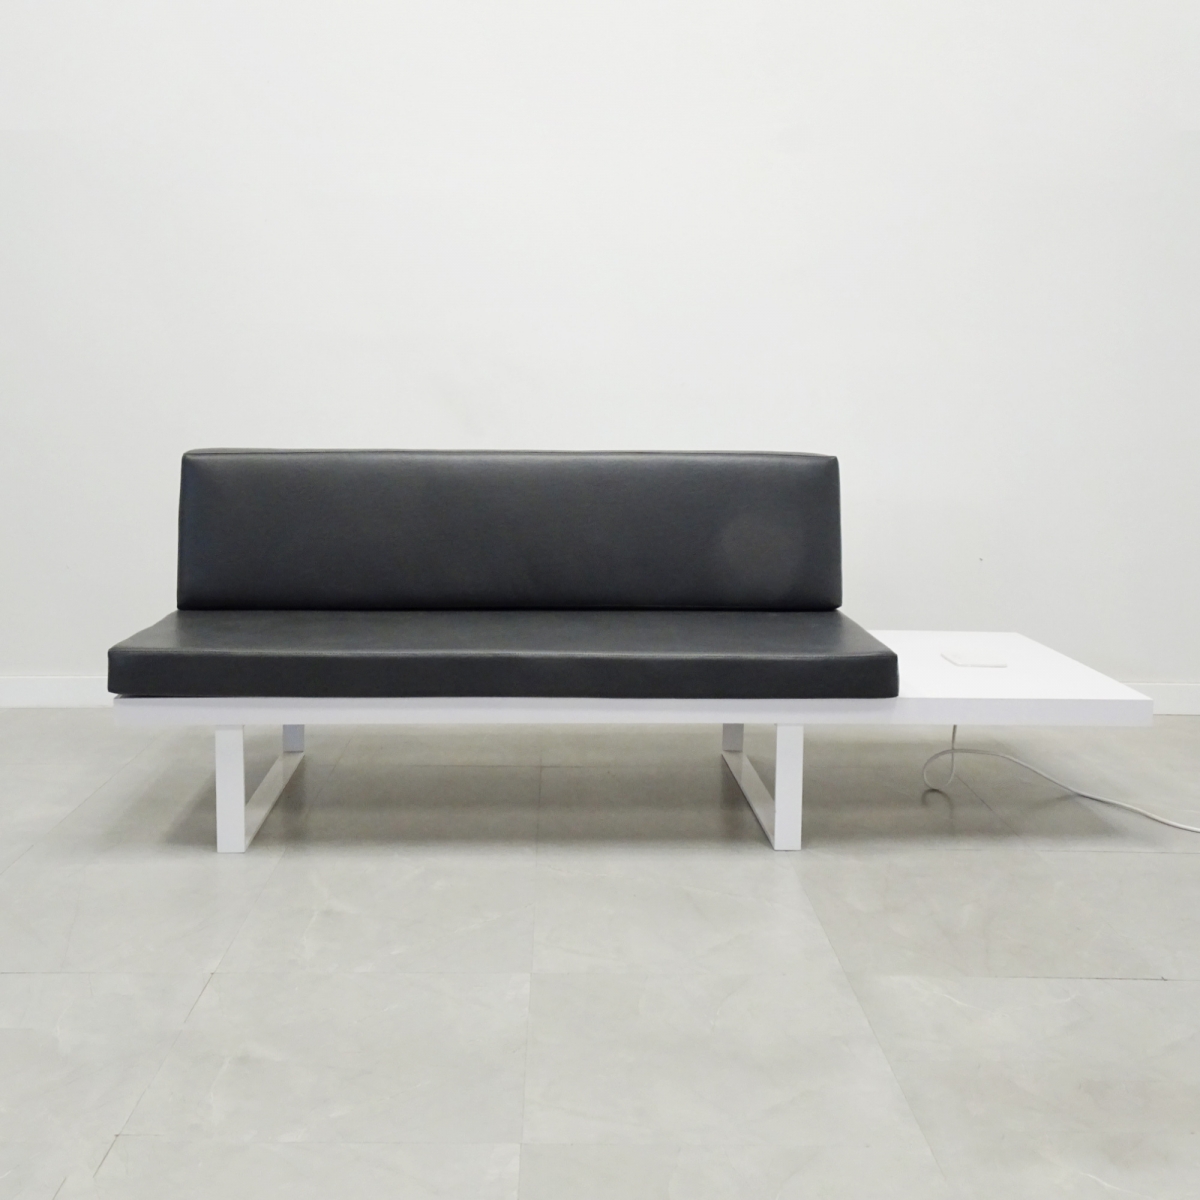 96 In Axis Straight Sofa - Stock #1001